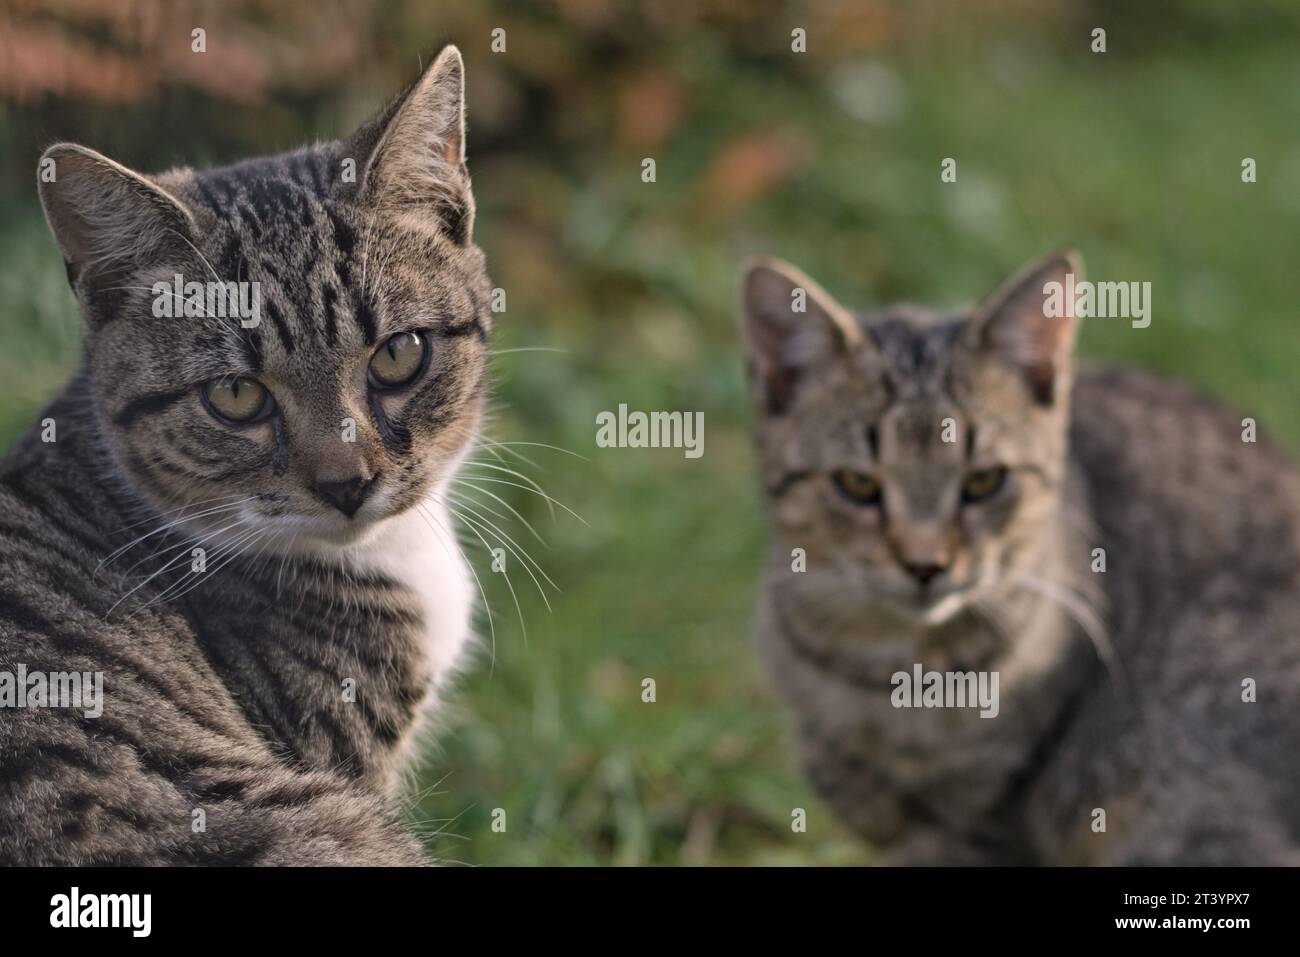 Two grumpy cats portrait. Photograph disturbed them and they do not like it. Felis catus. Stock Photo